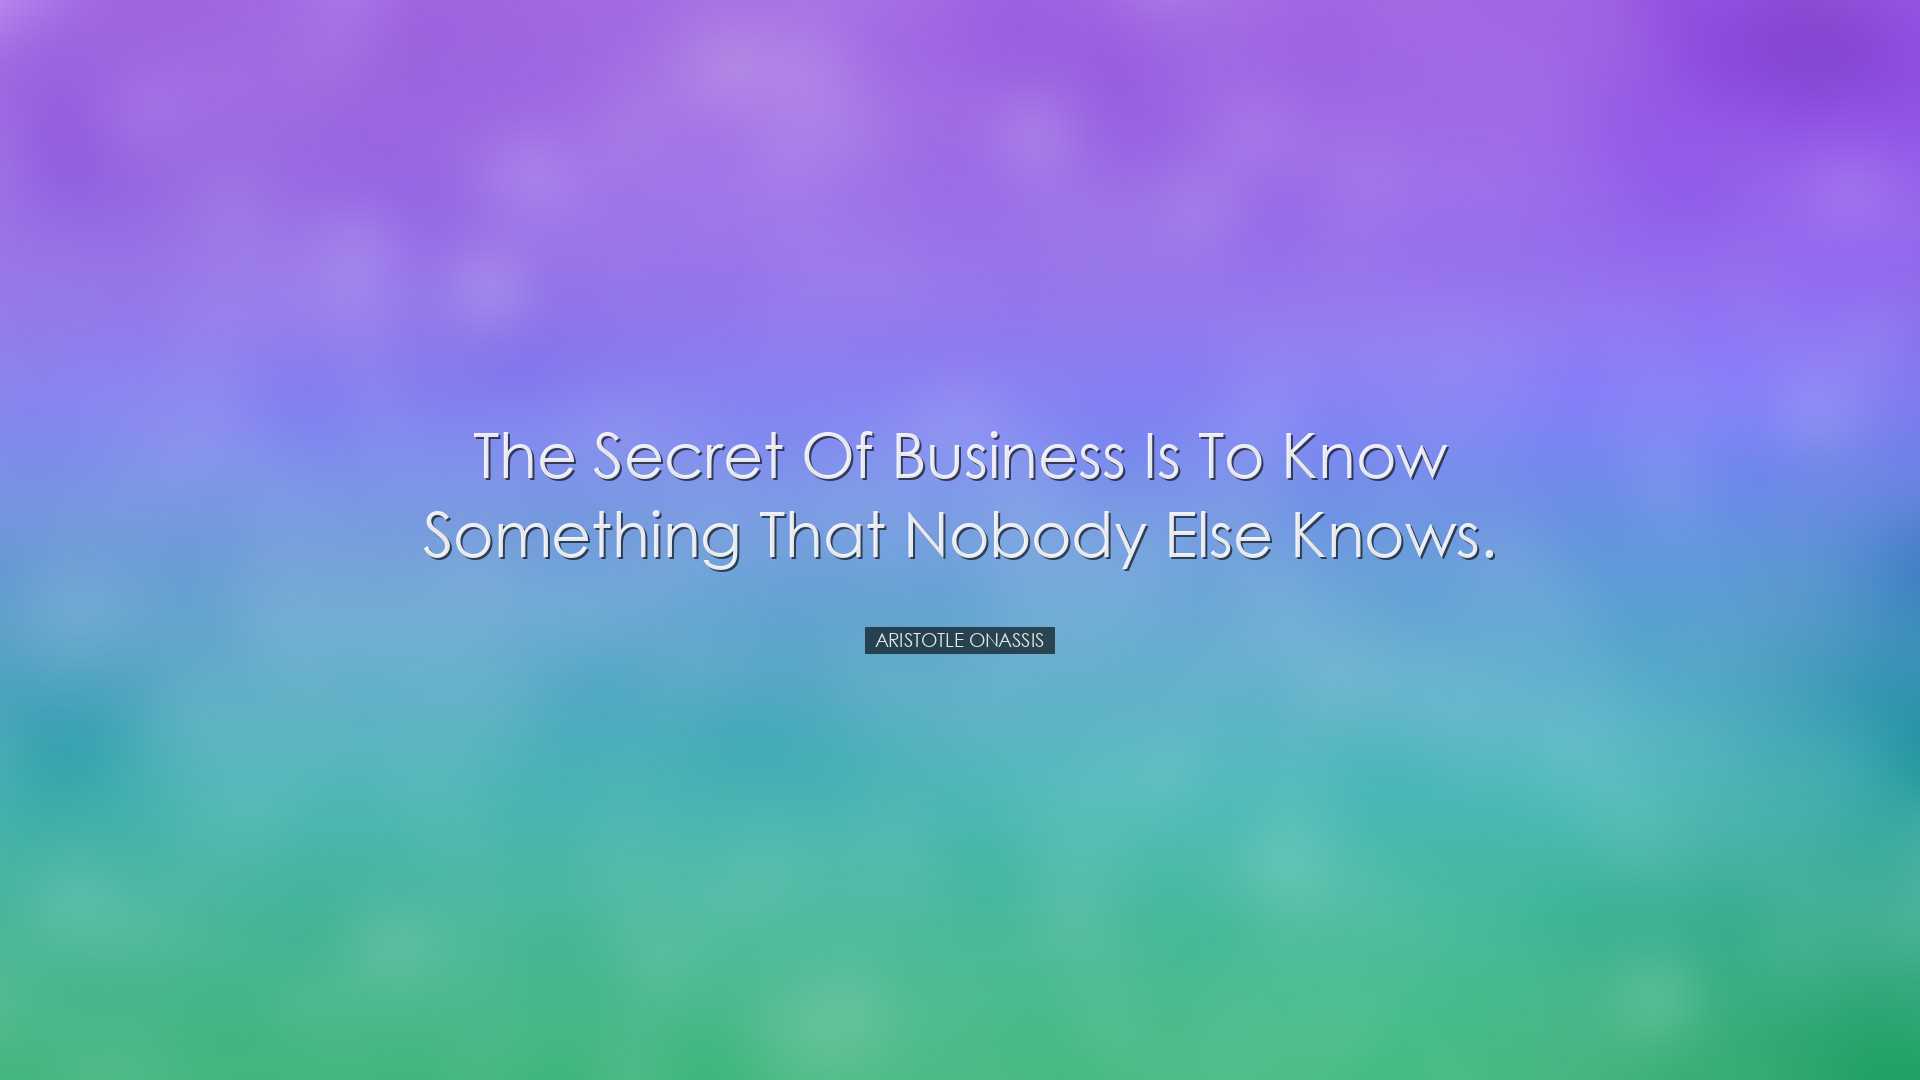 The secret of business is to know something that nobody else knows